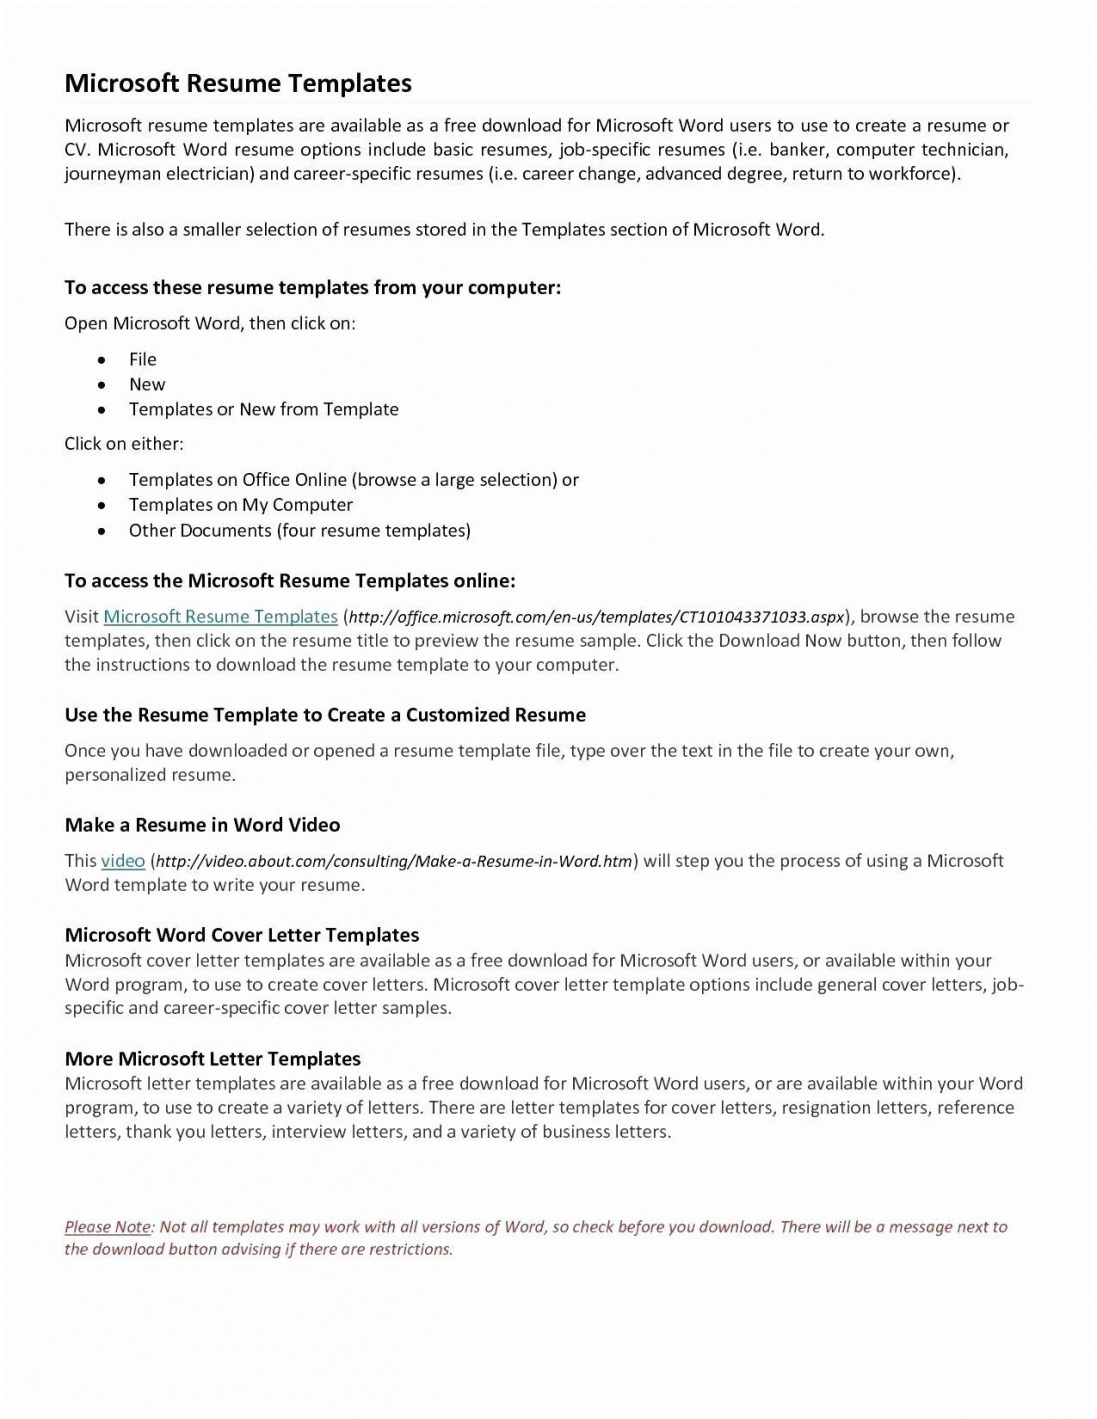 030 Formal Letter Microsoft Word Valid Resume Template Ideas With How To Make A Cv Template On Microsoft Word